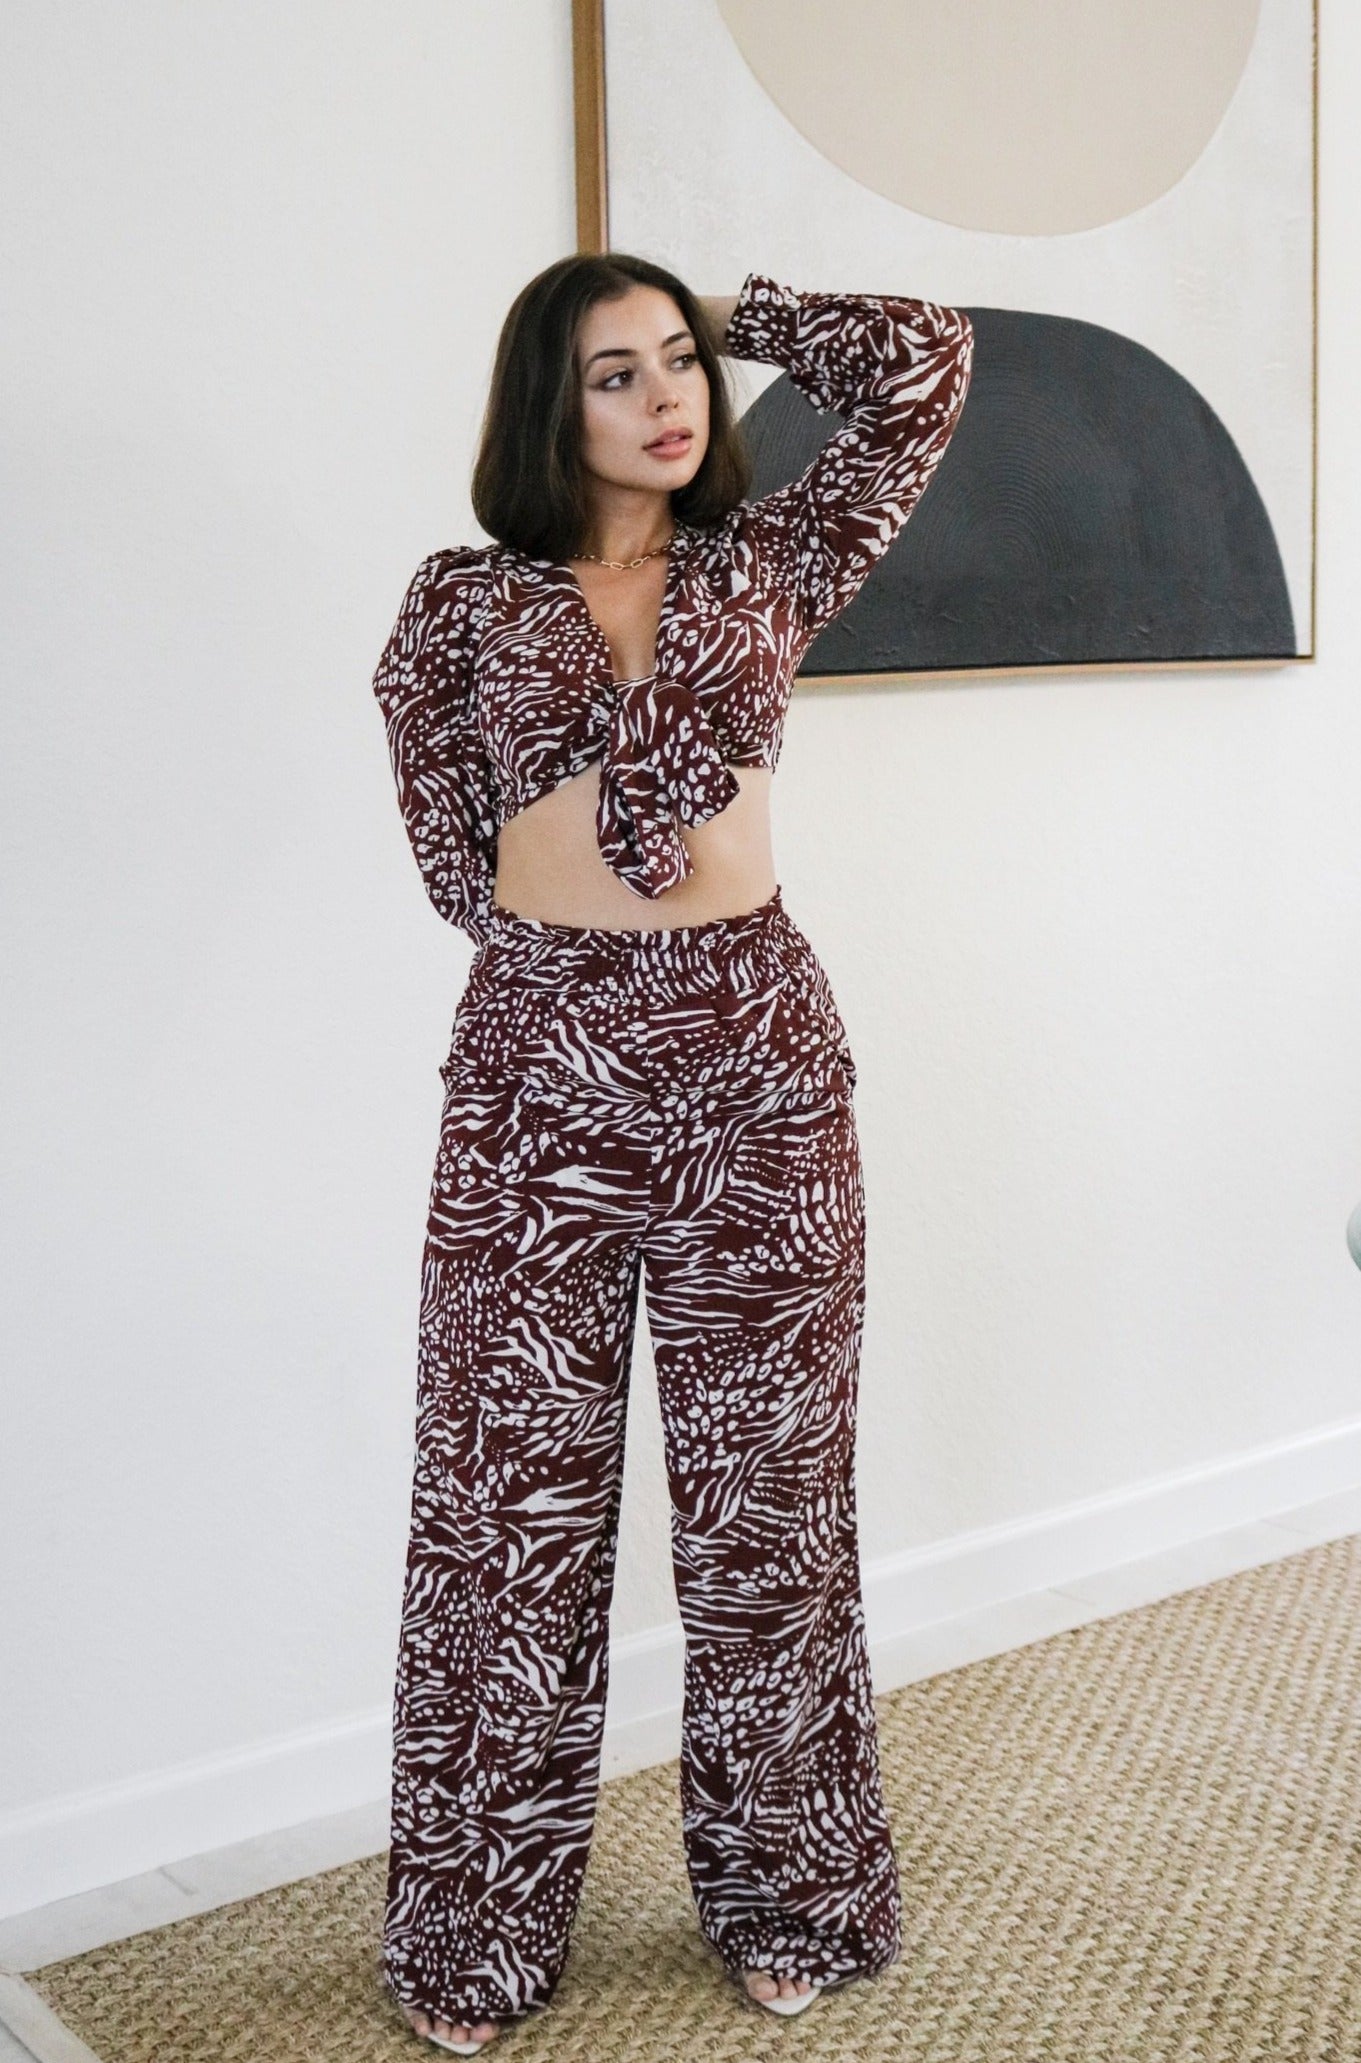 Print Pant Set with Wide Leg Pants and Tie Top in Brown Plum for Scarlette The Label, an online fashion boutique and label for women.